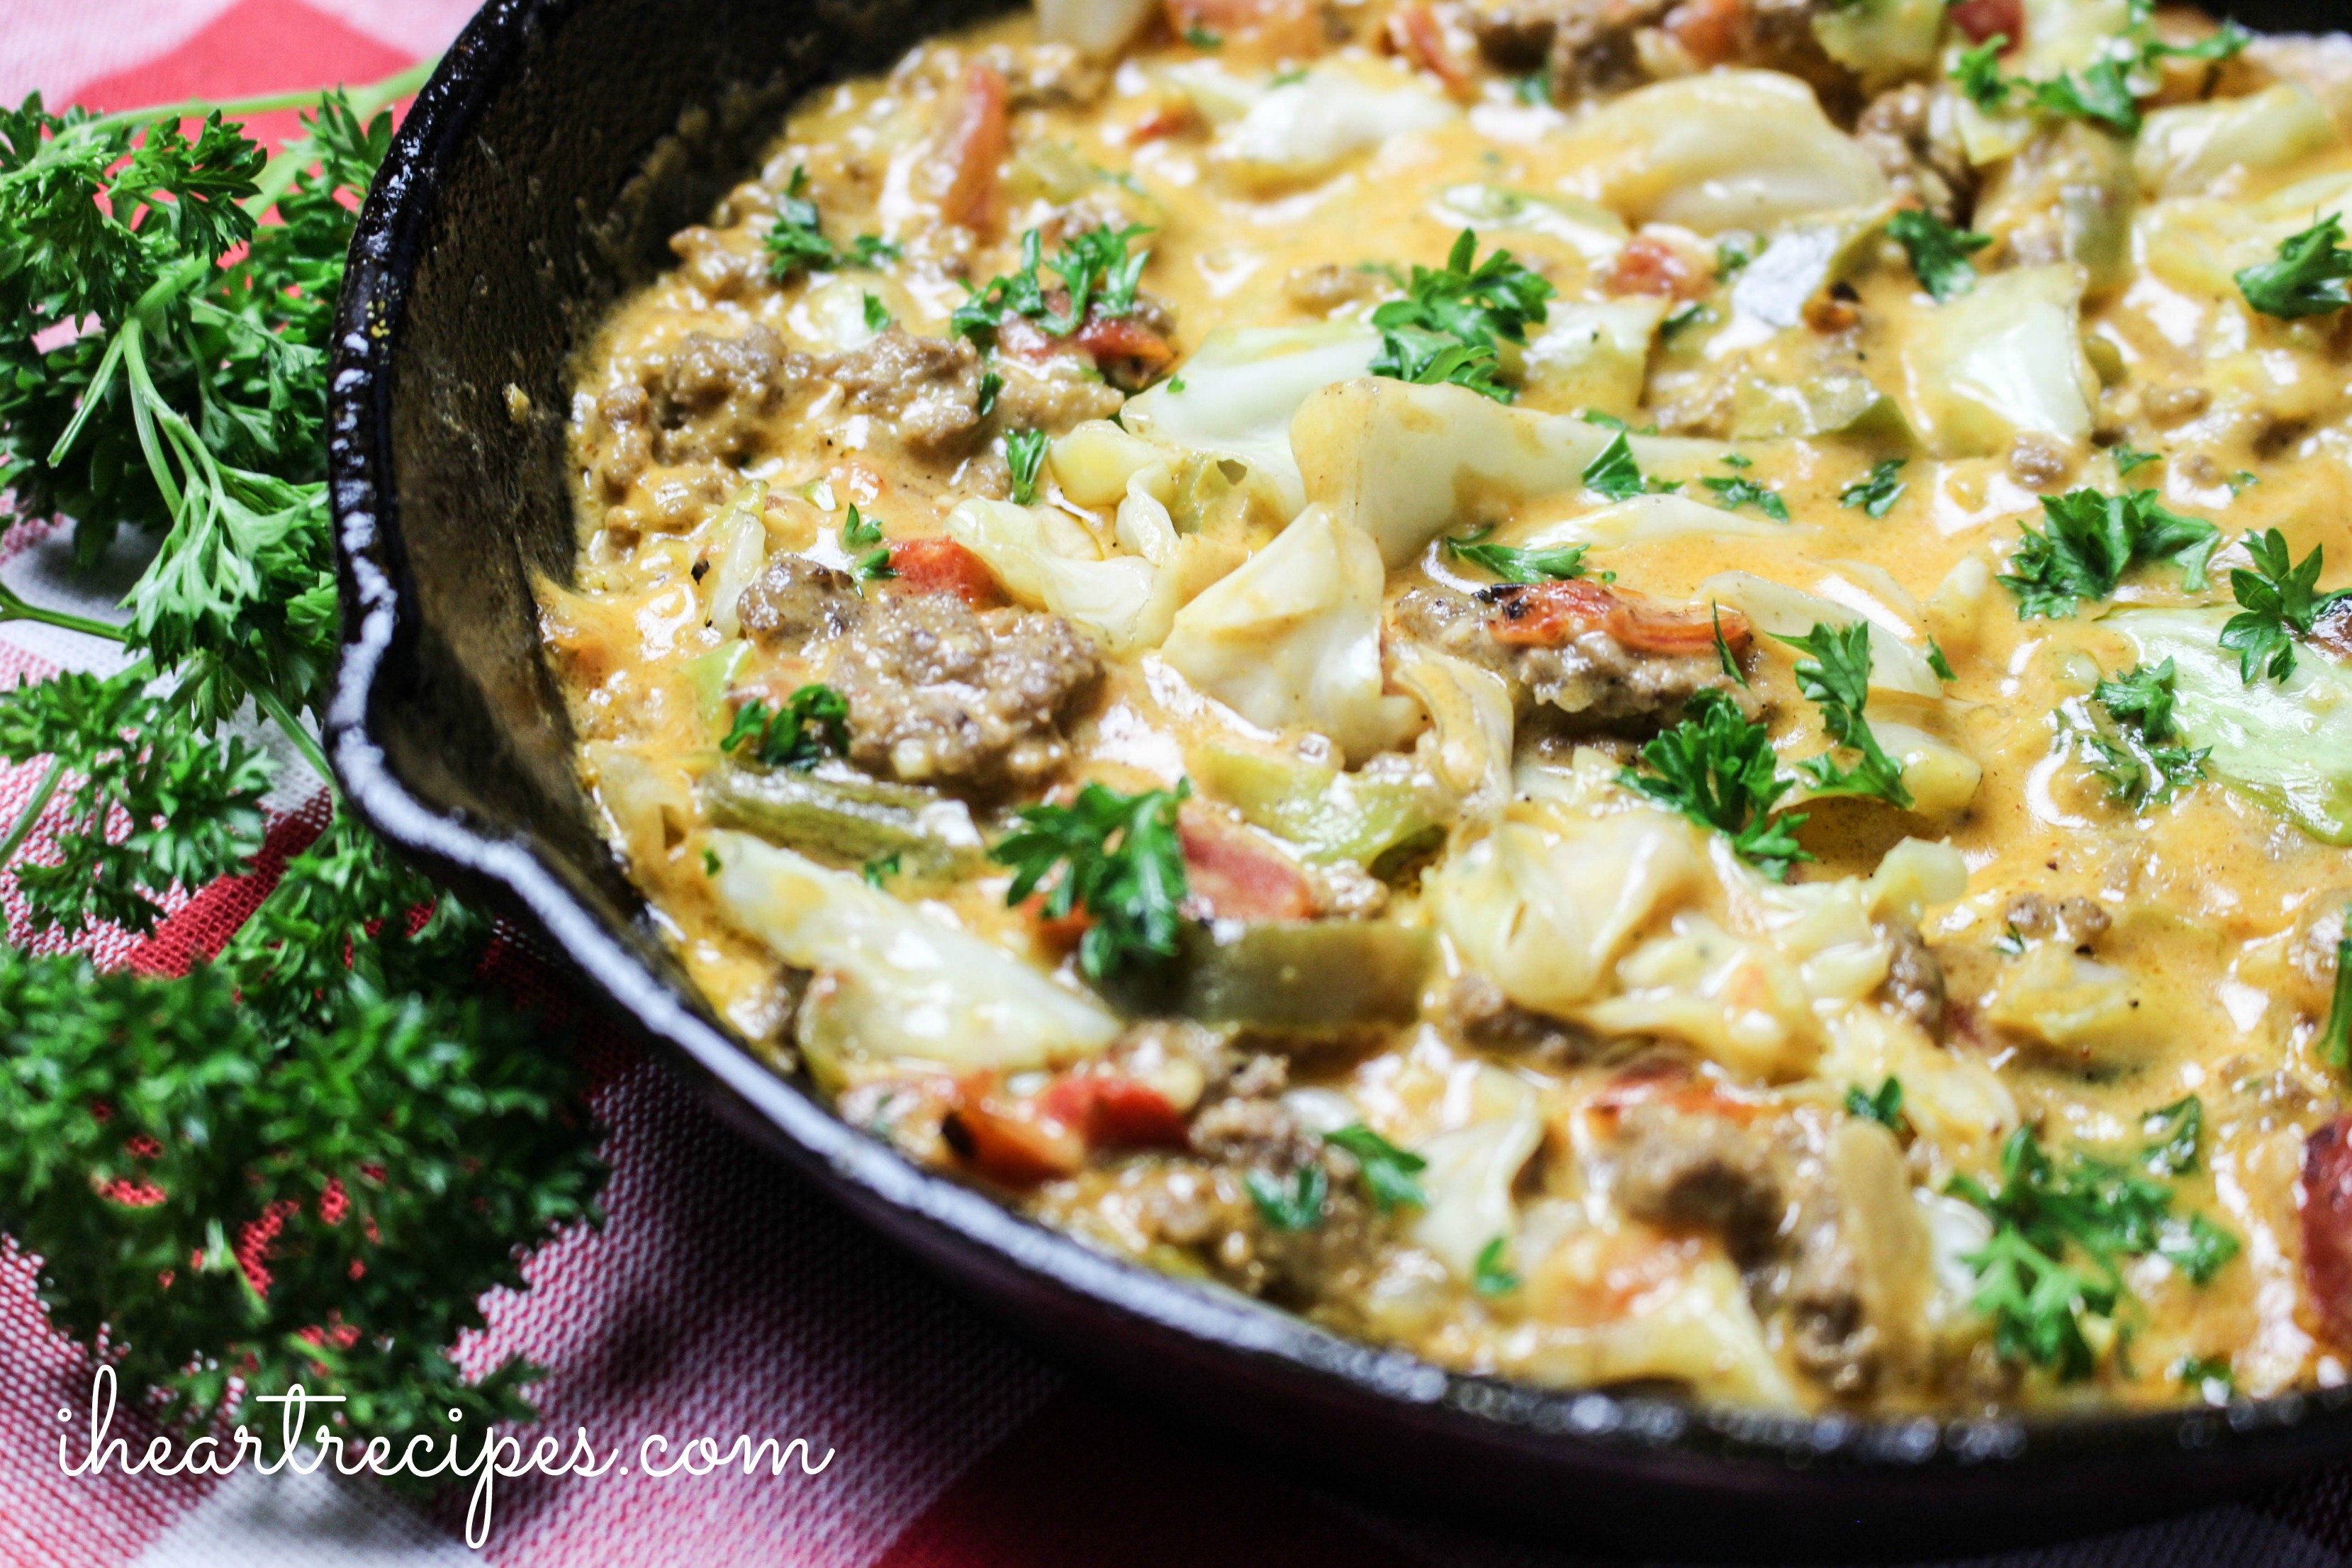 Creamy Cheesy Cabbage Creole simmering in a cast iron skillet. This dish is a kaleidoscope of flavors!